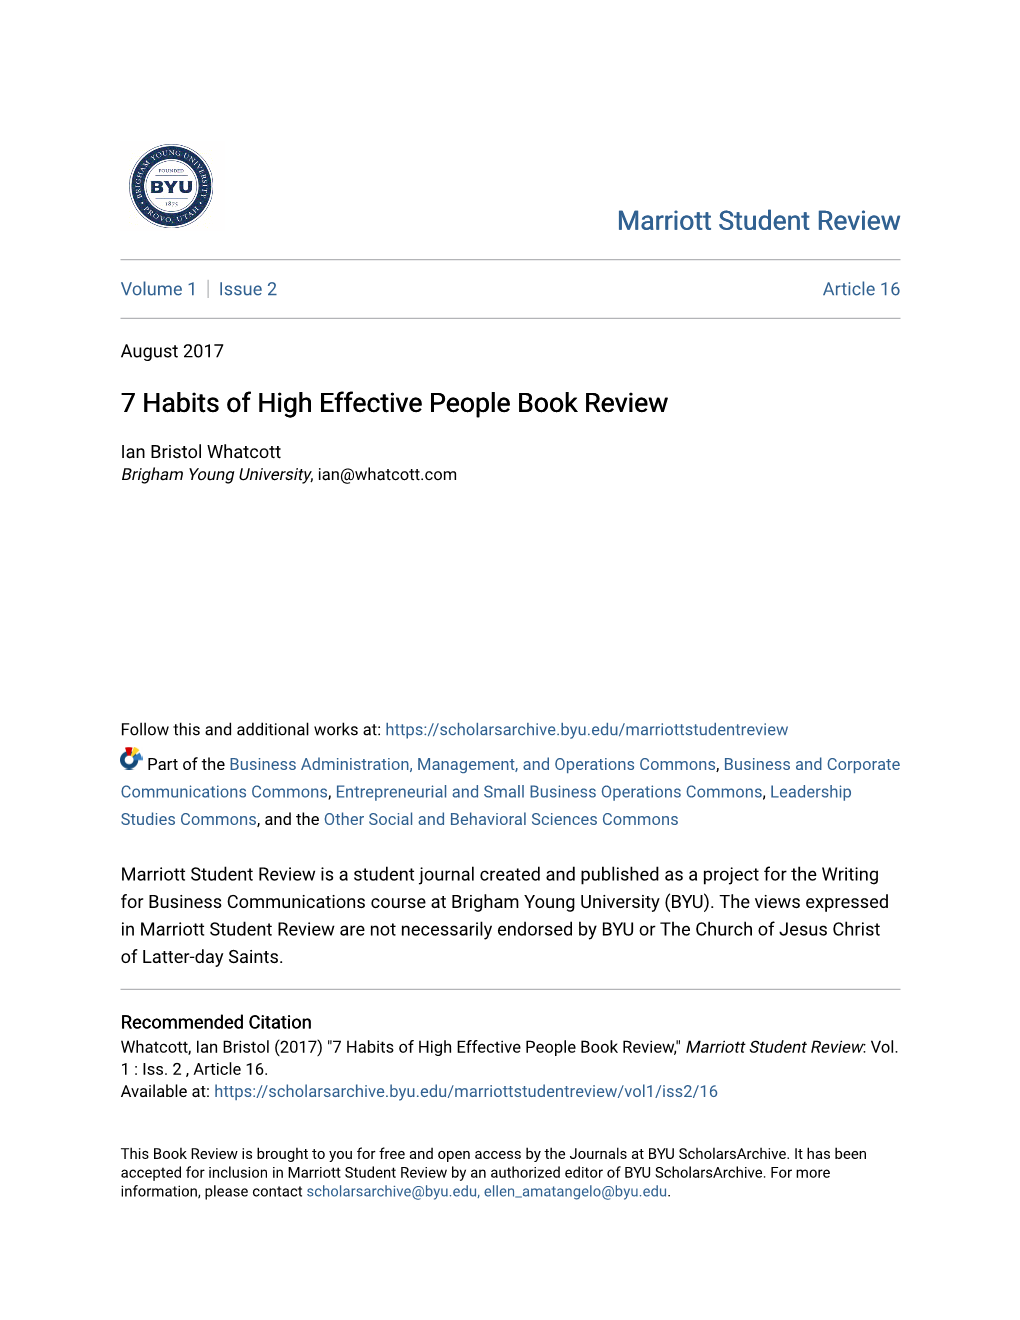 7 Habits of High Effective People Book Review